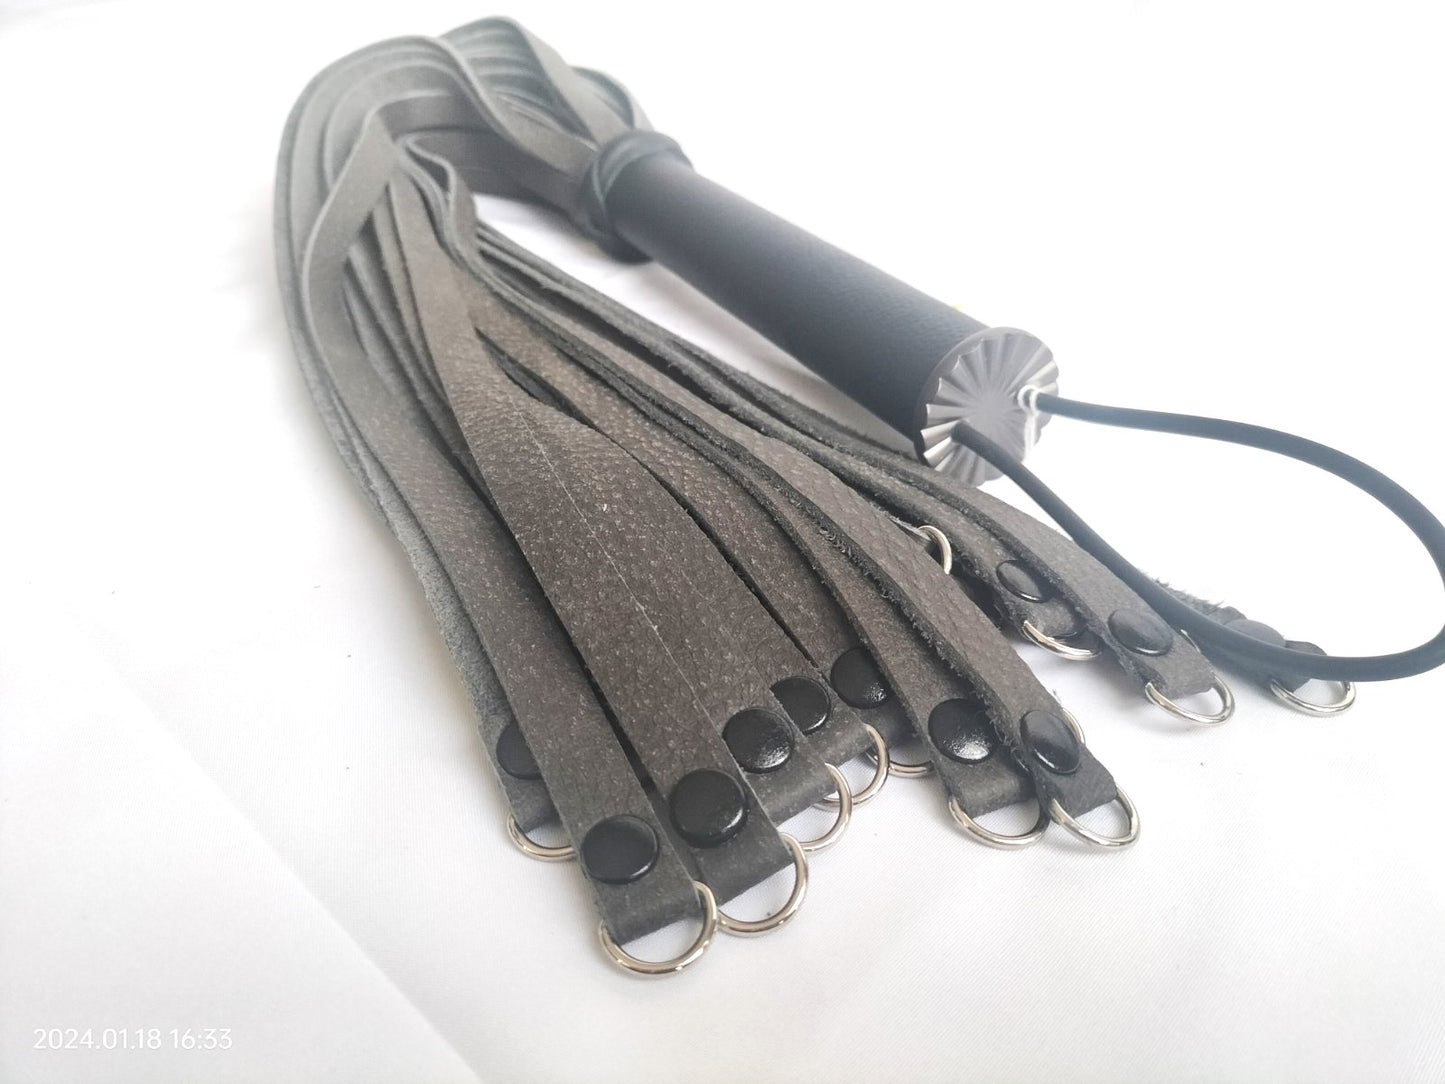 Anthracite leather flogger with black leather handle and weighted with double rivets and D-rings